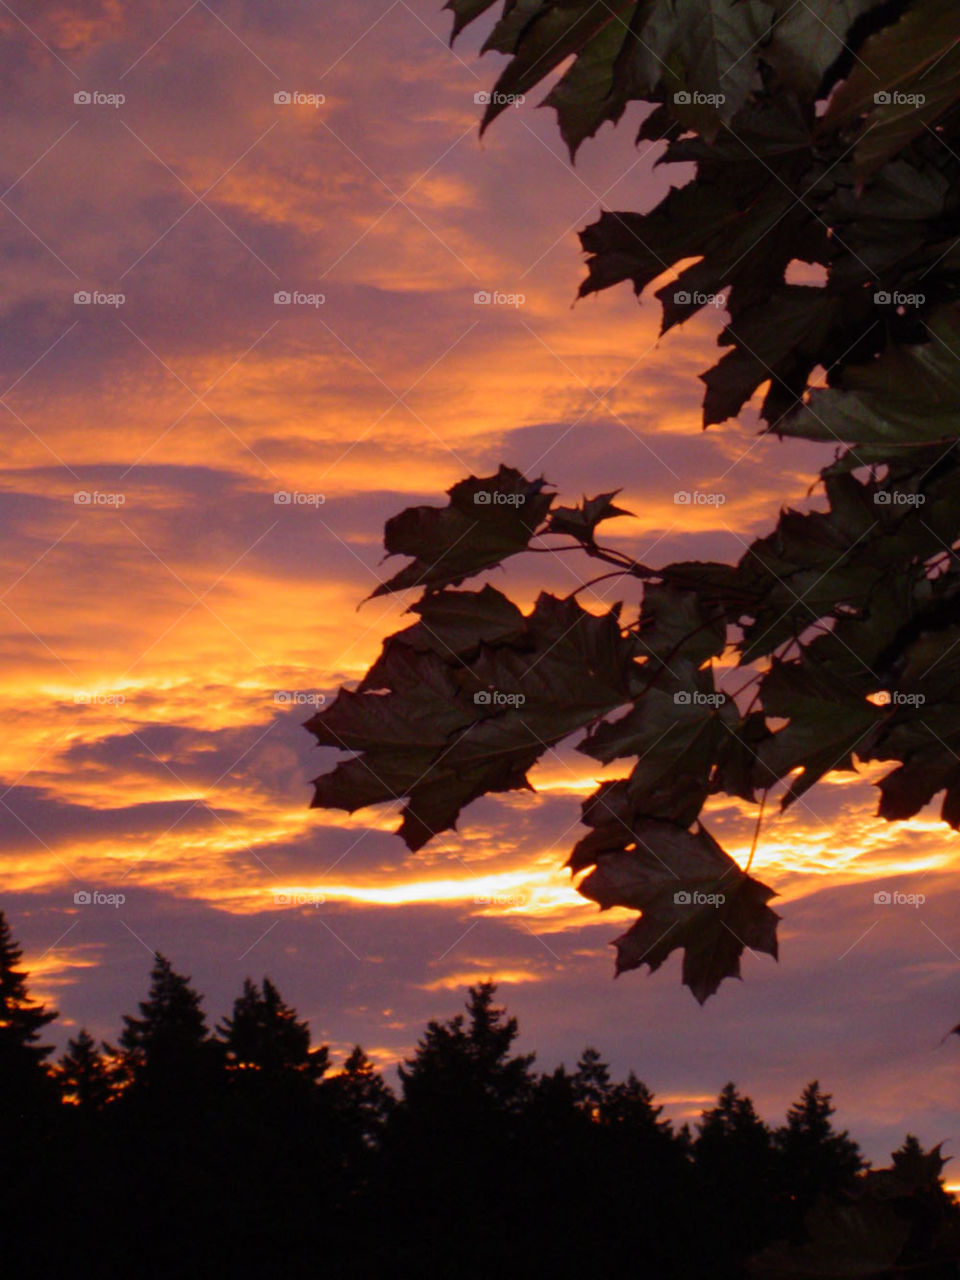 Gorgeous sunset over the Comox Valley, Vancouver island, British Columbia, Canada